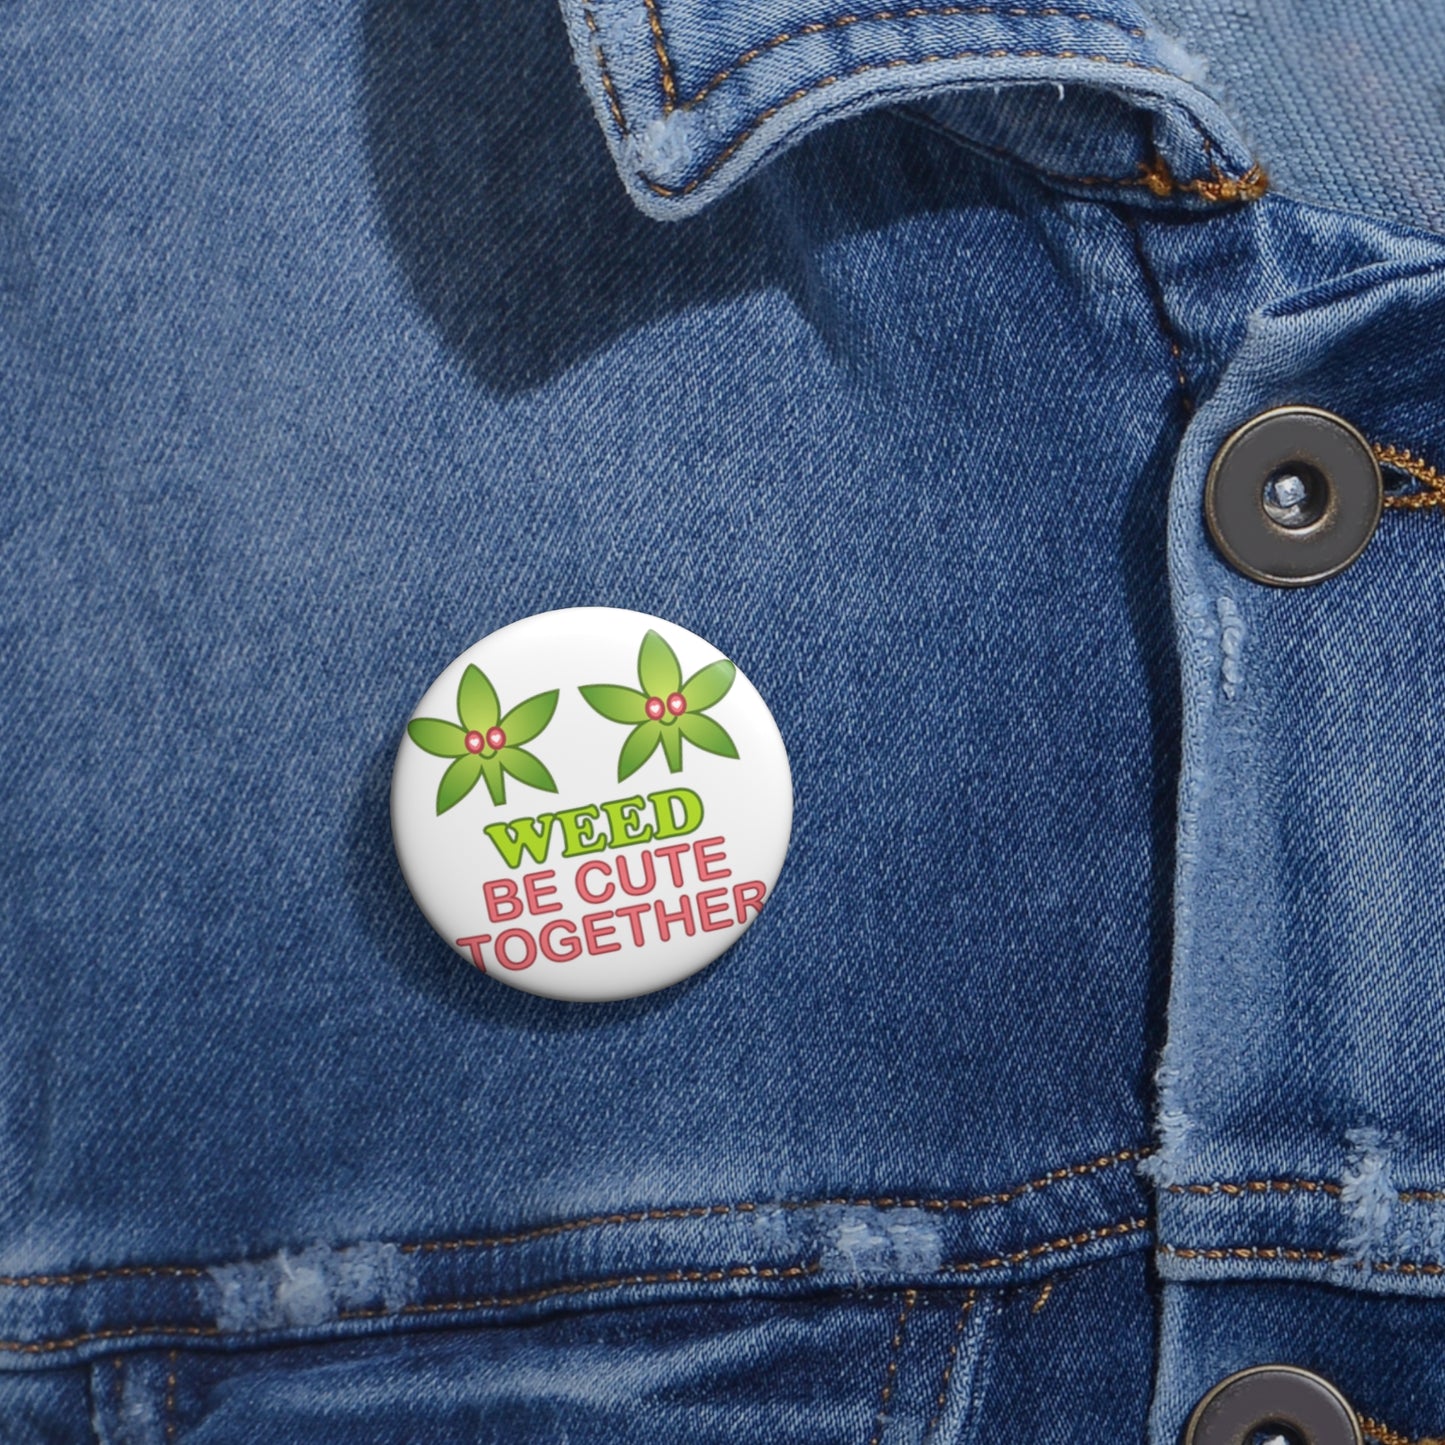 Weed Be Cute Together Pin Button | Weed, 420, Funny